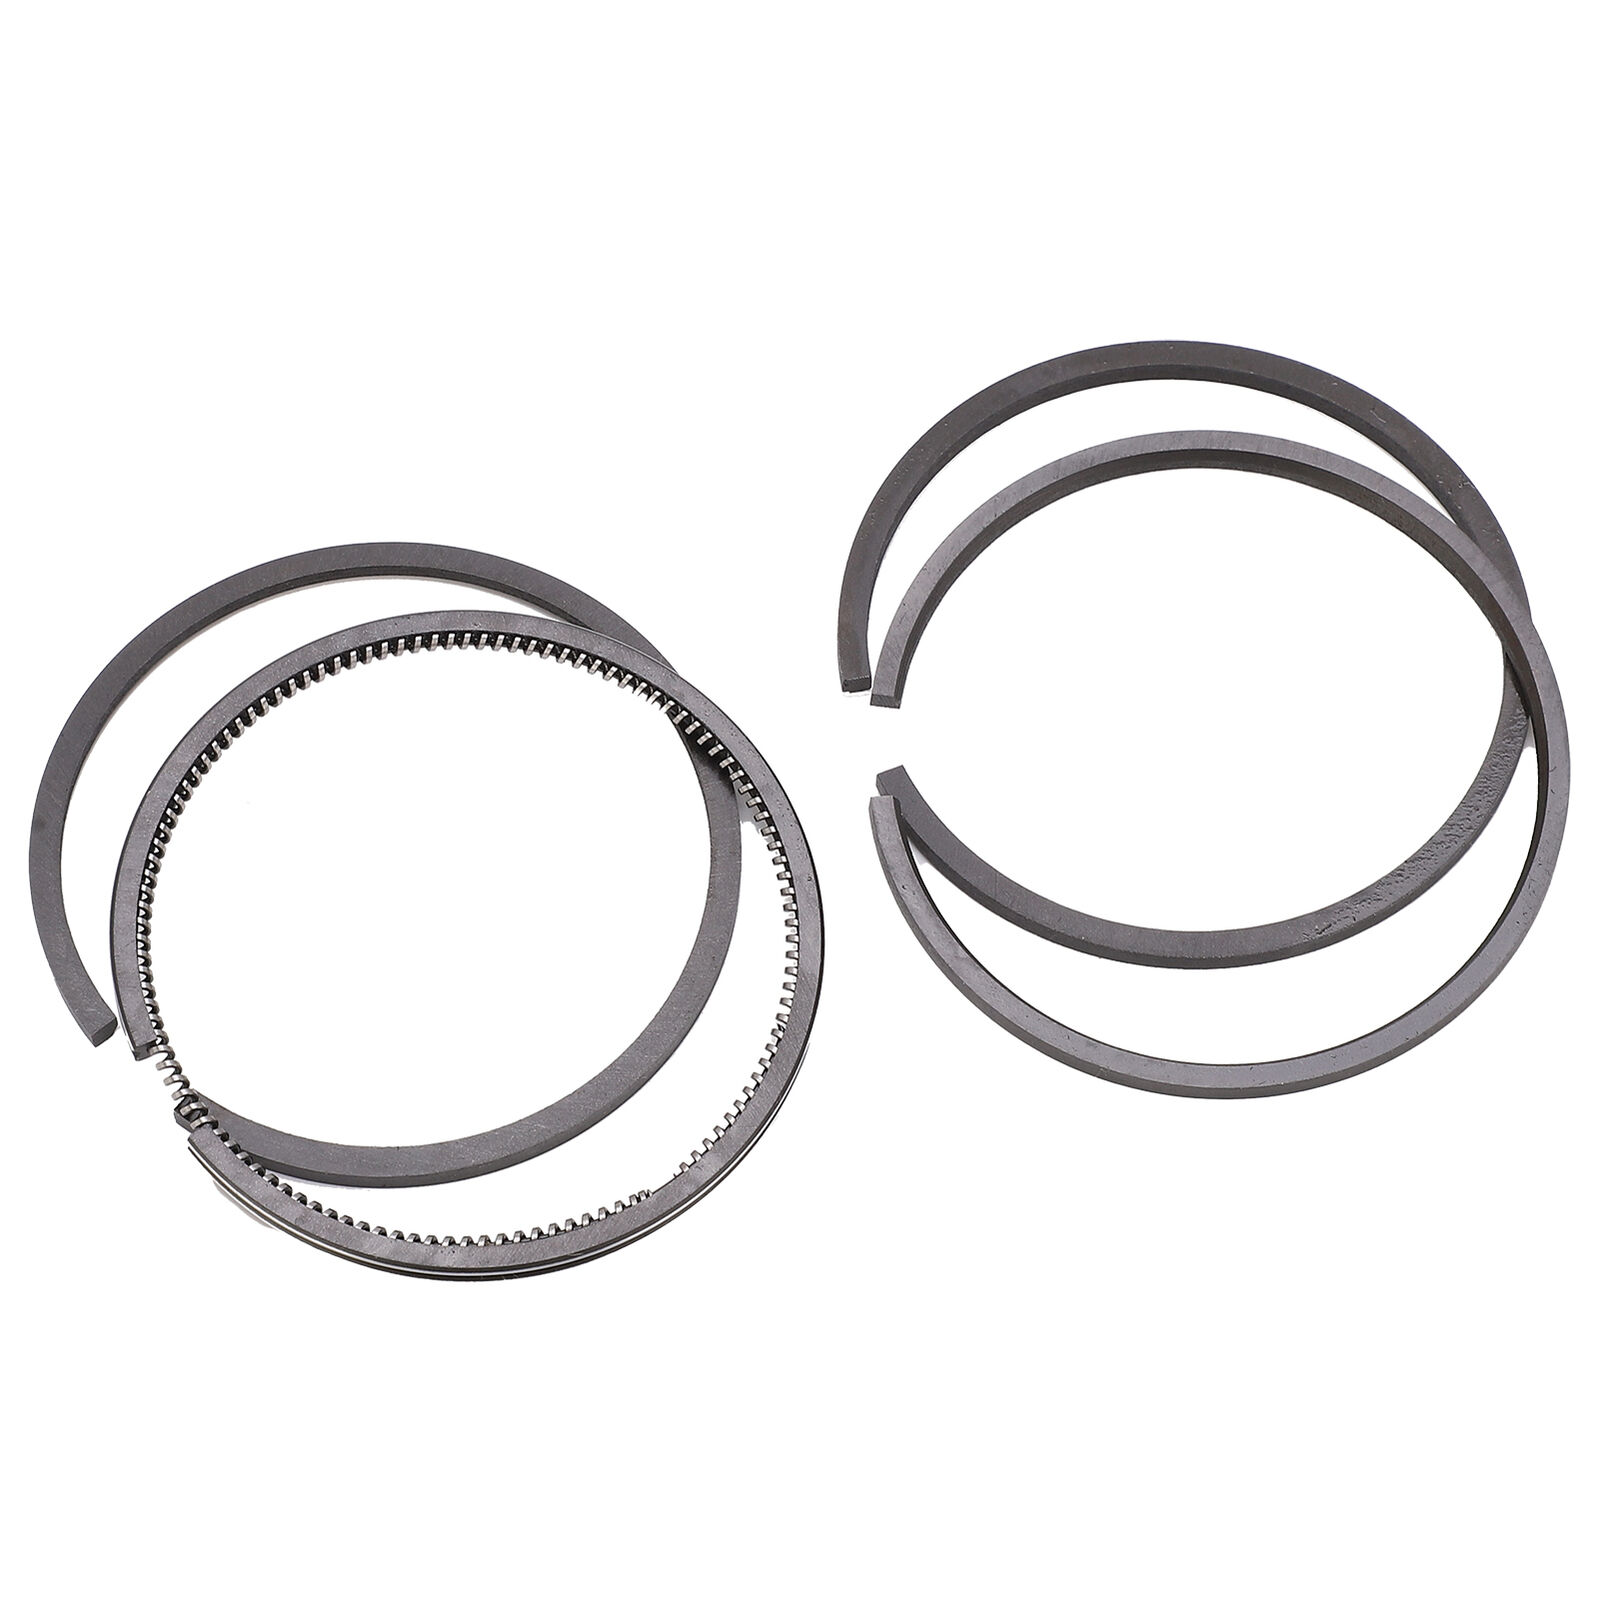 55mm Piston Ring 1.05/12.5/16 7.5KW10HP Replacement Engine Accessory Piston Ring